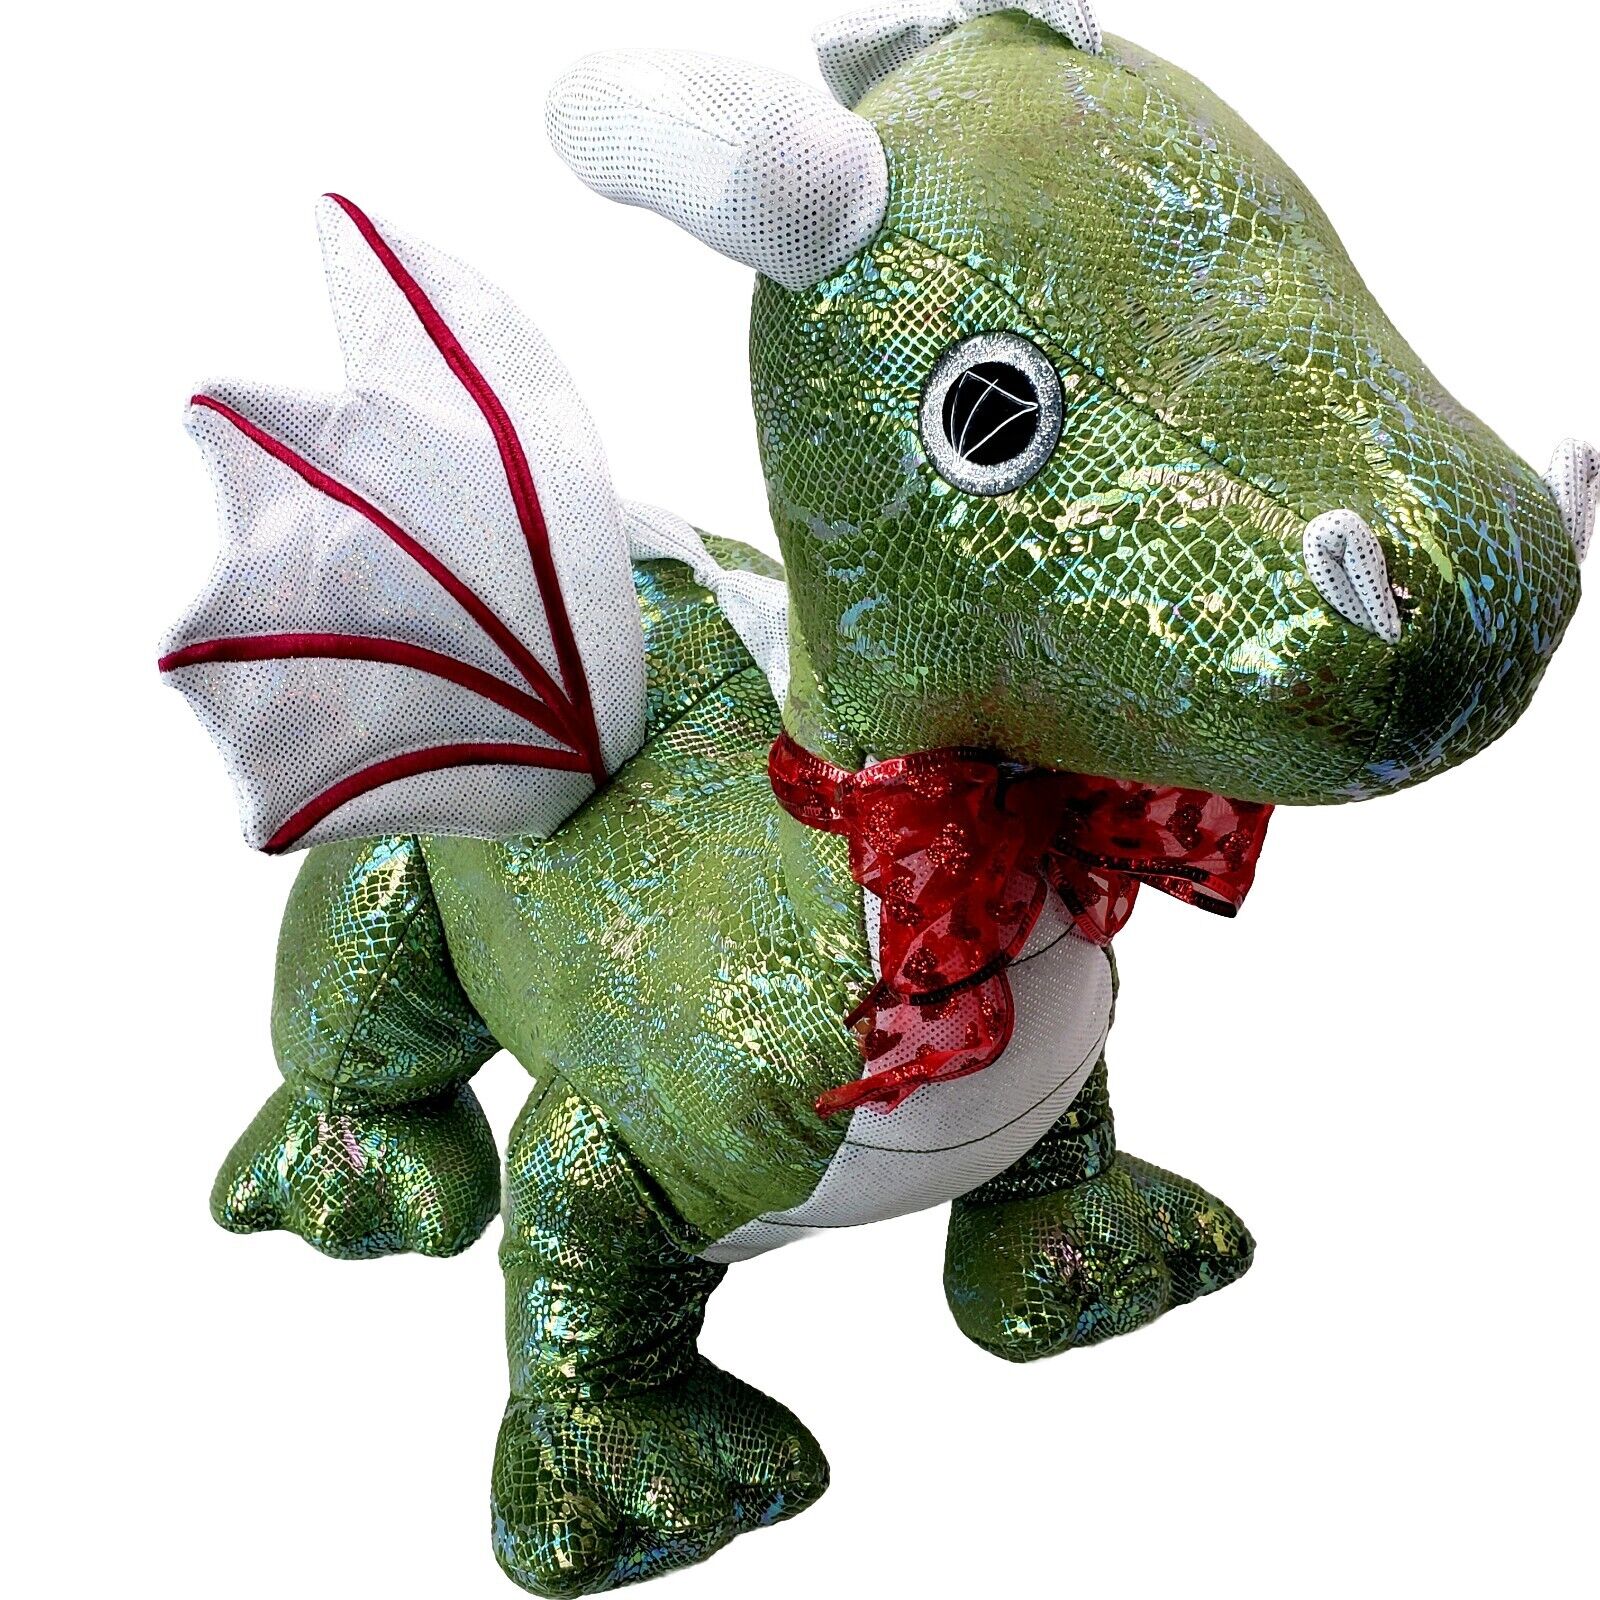 Valentine Plush Dragon Green Color Merry Brite 17”x26”x20” New With Red Bow. New